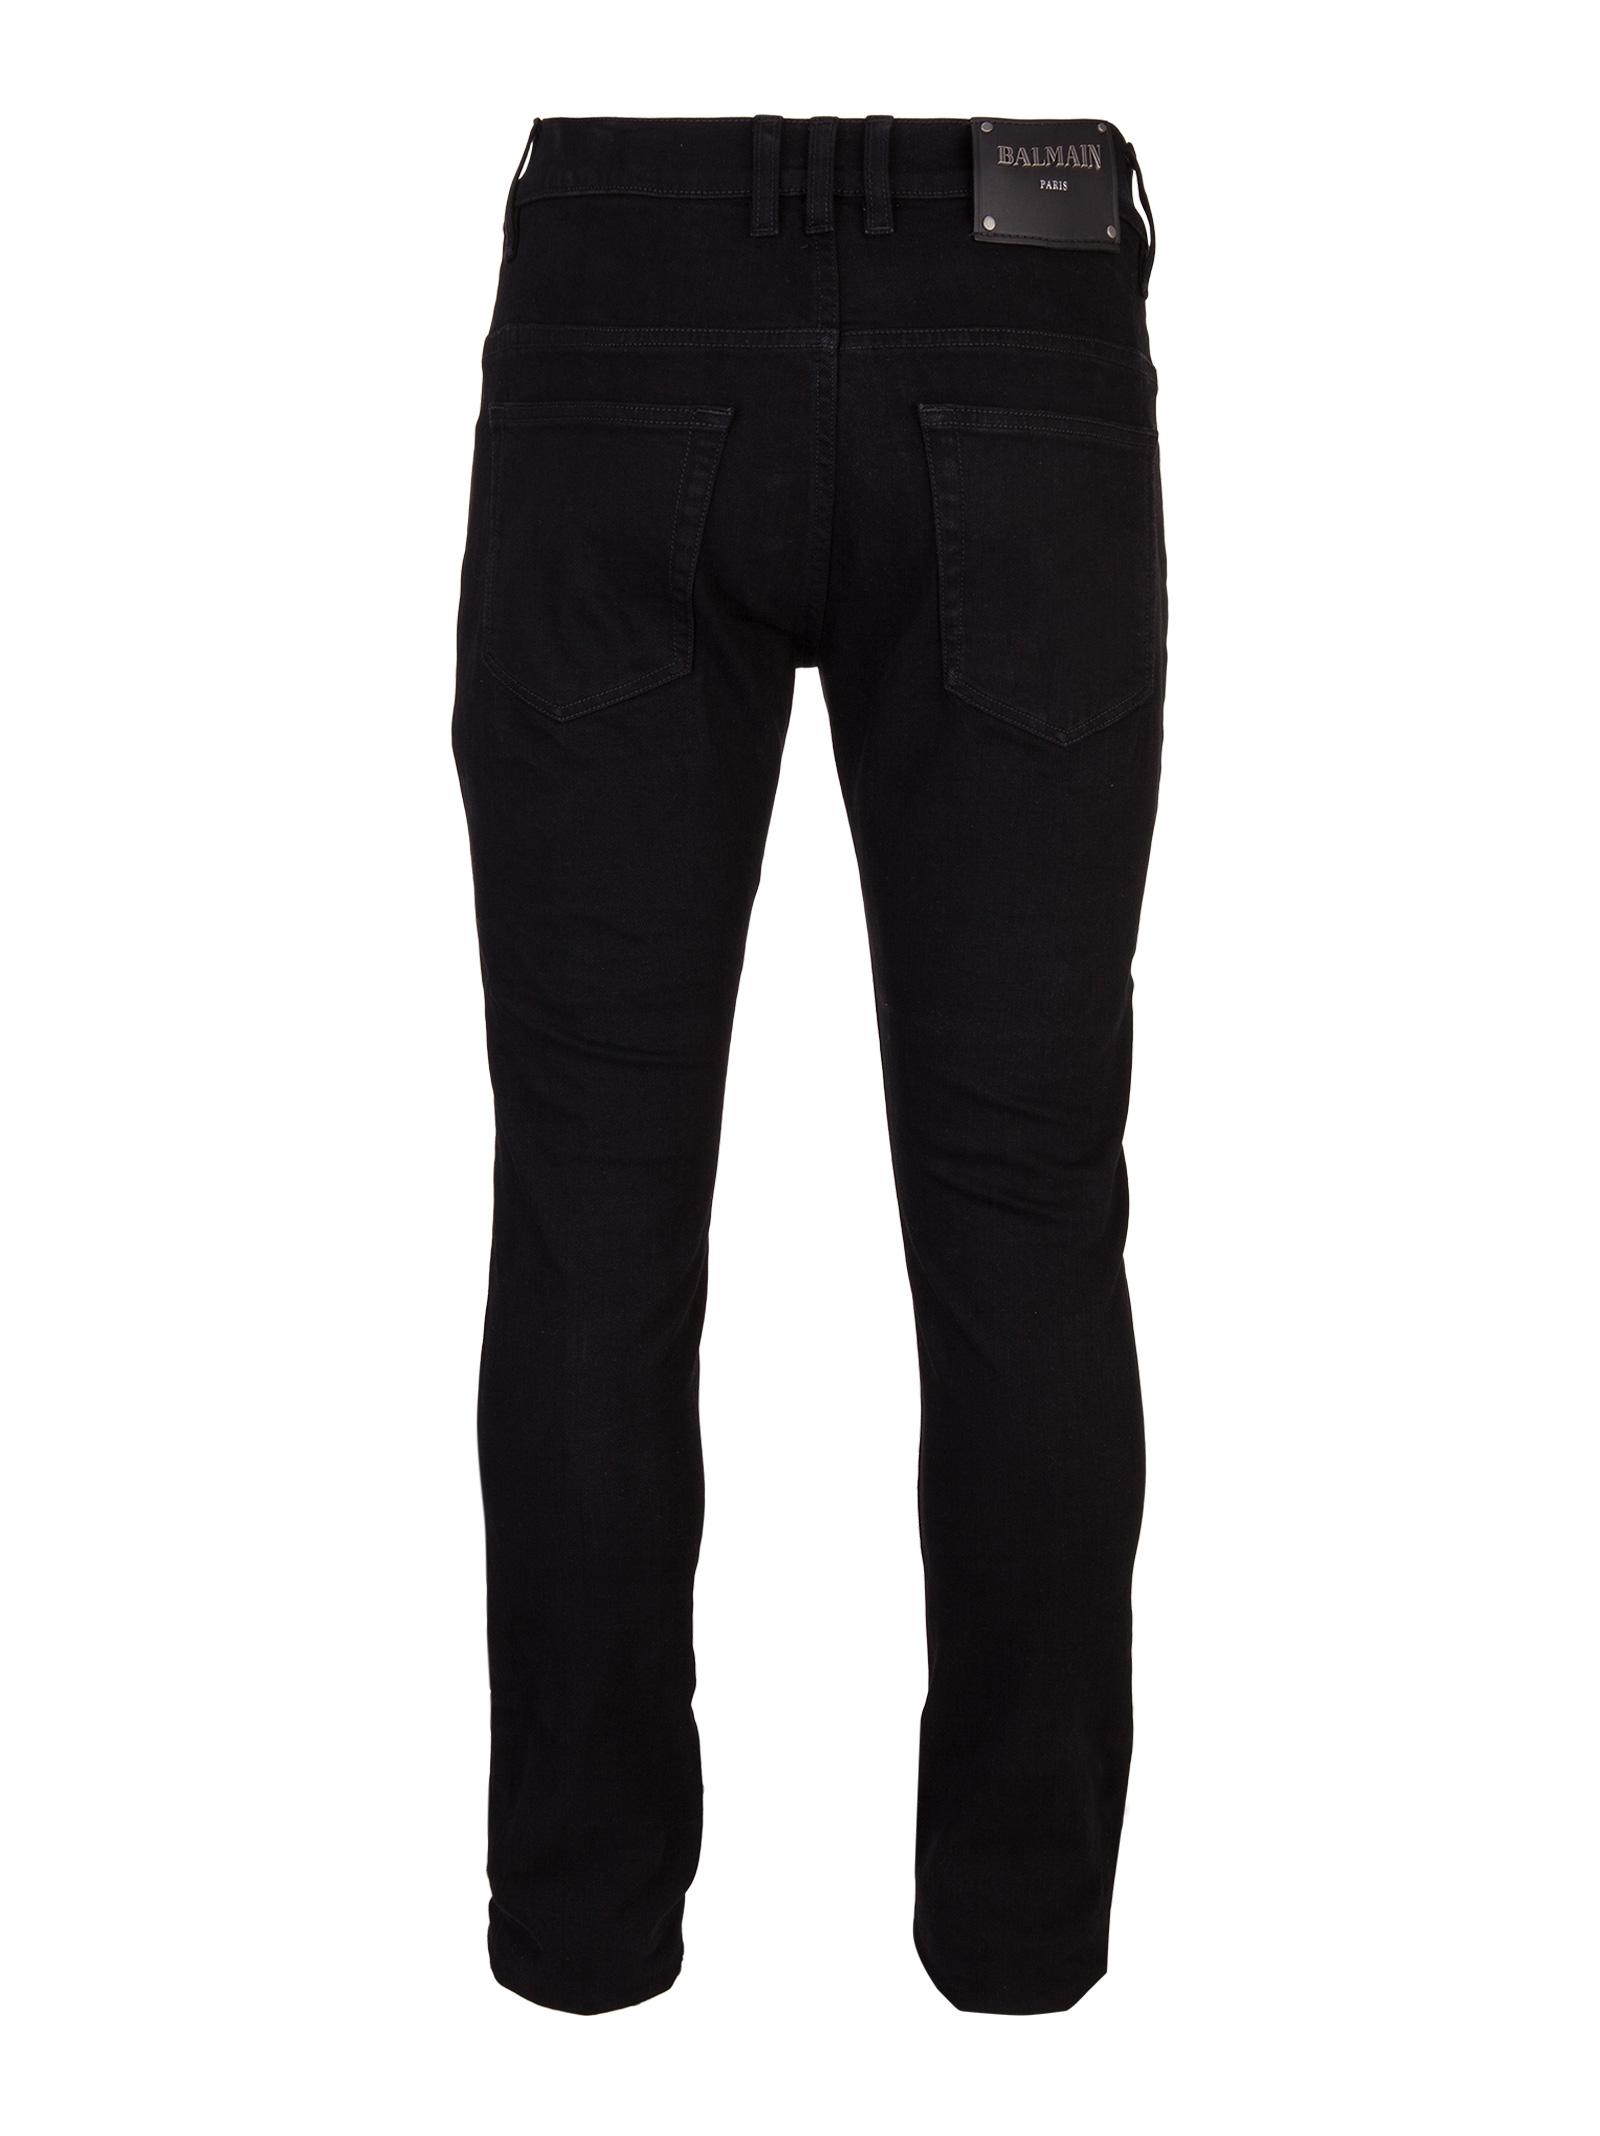 Balmain Black Cotton Blend Jeans With Five Pockets And Brand Logo Patch ...